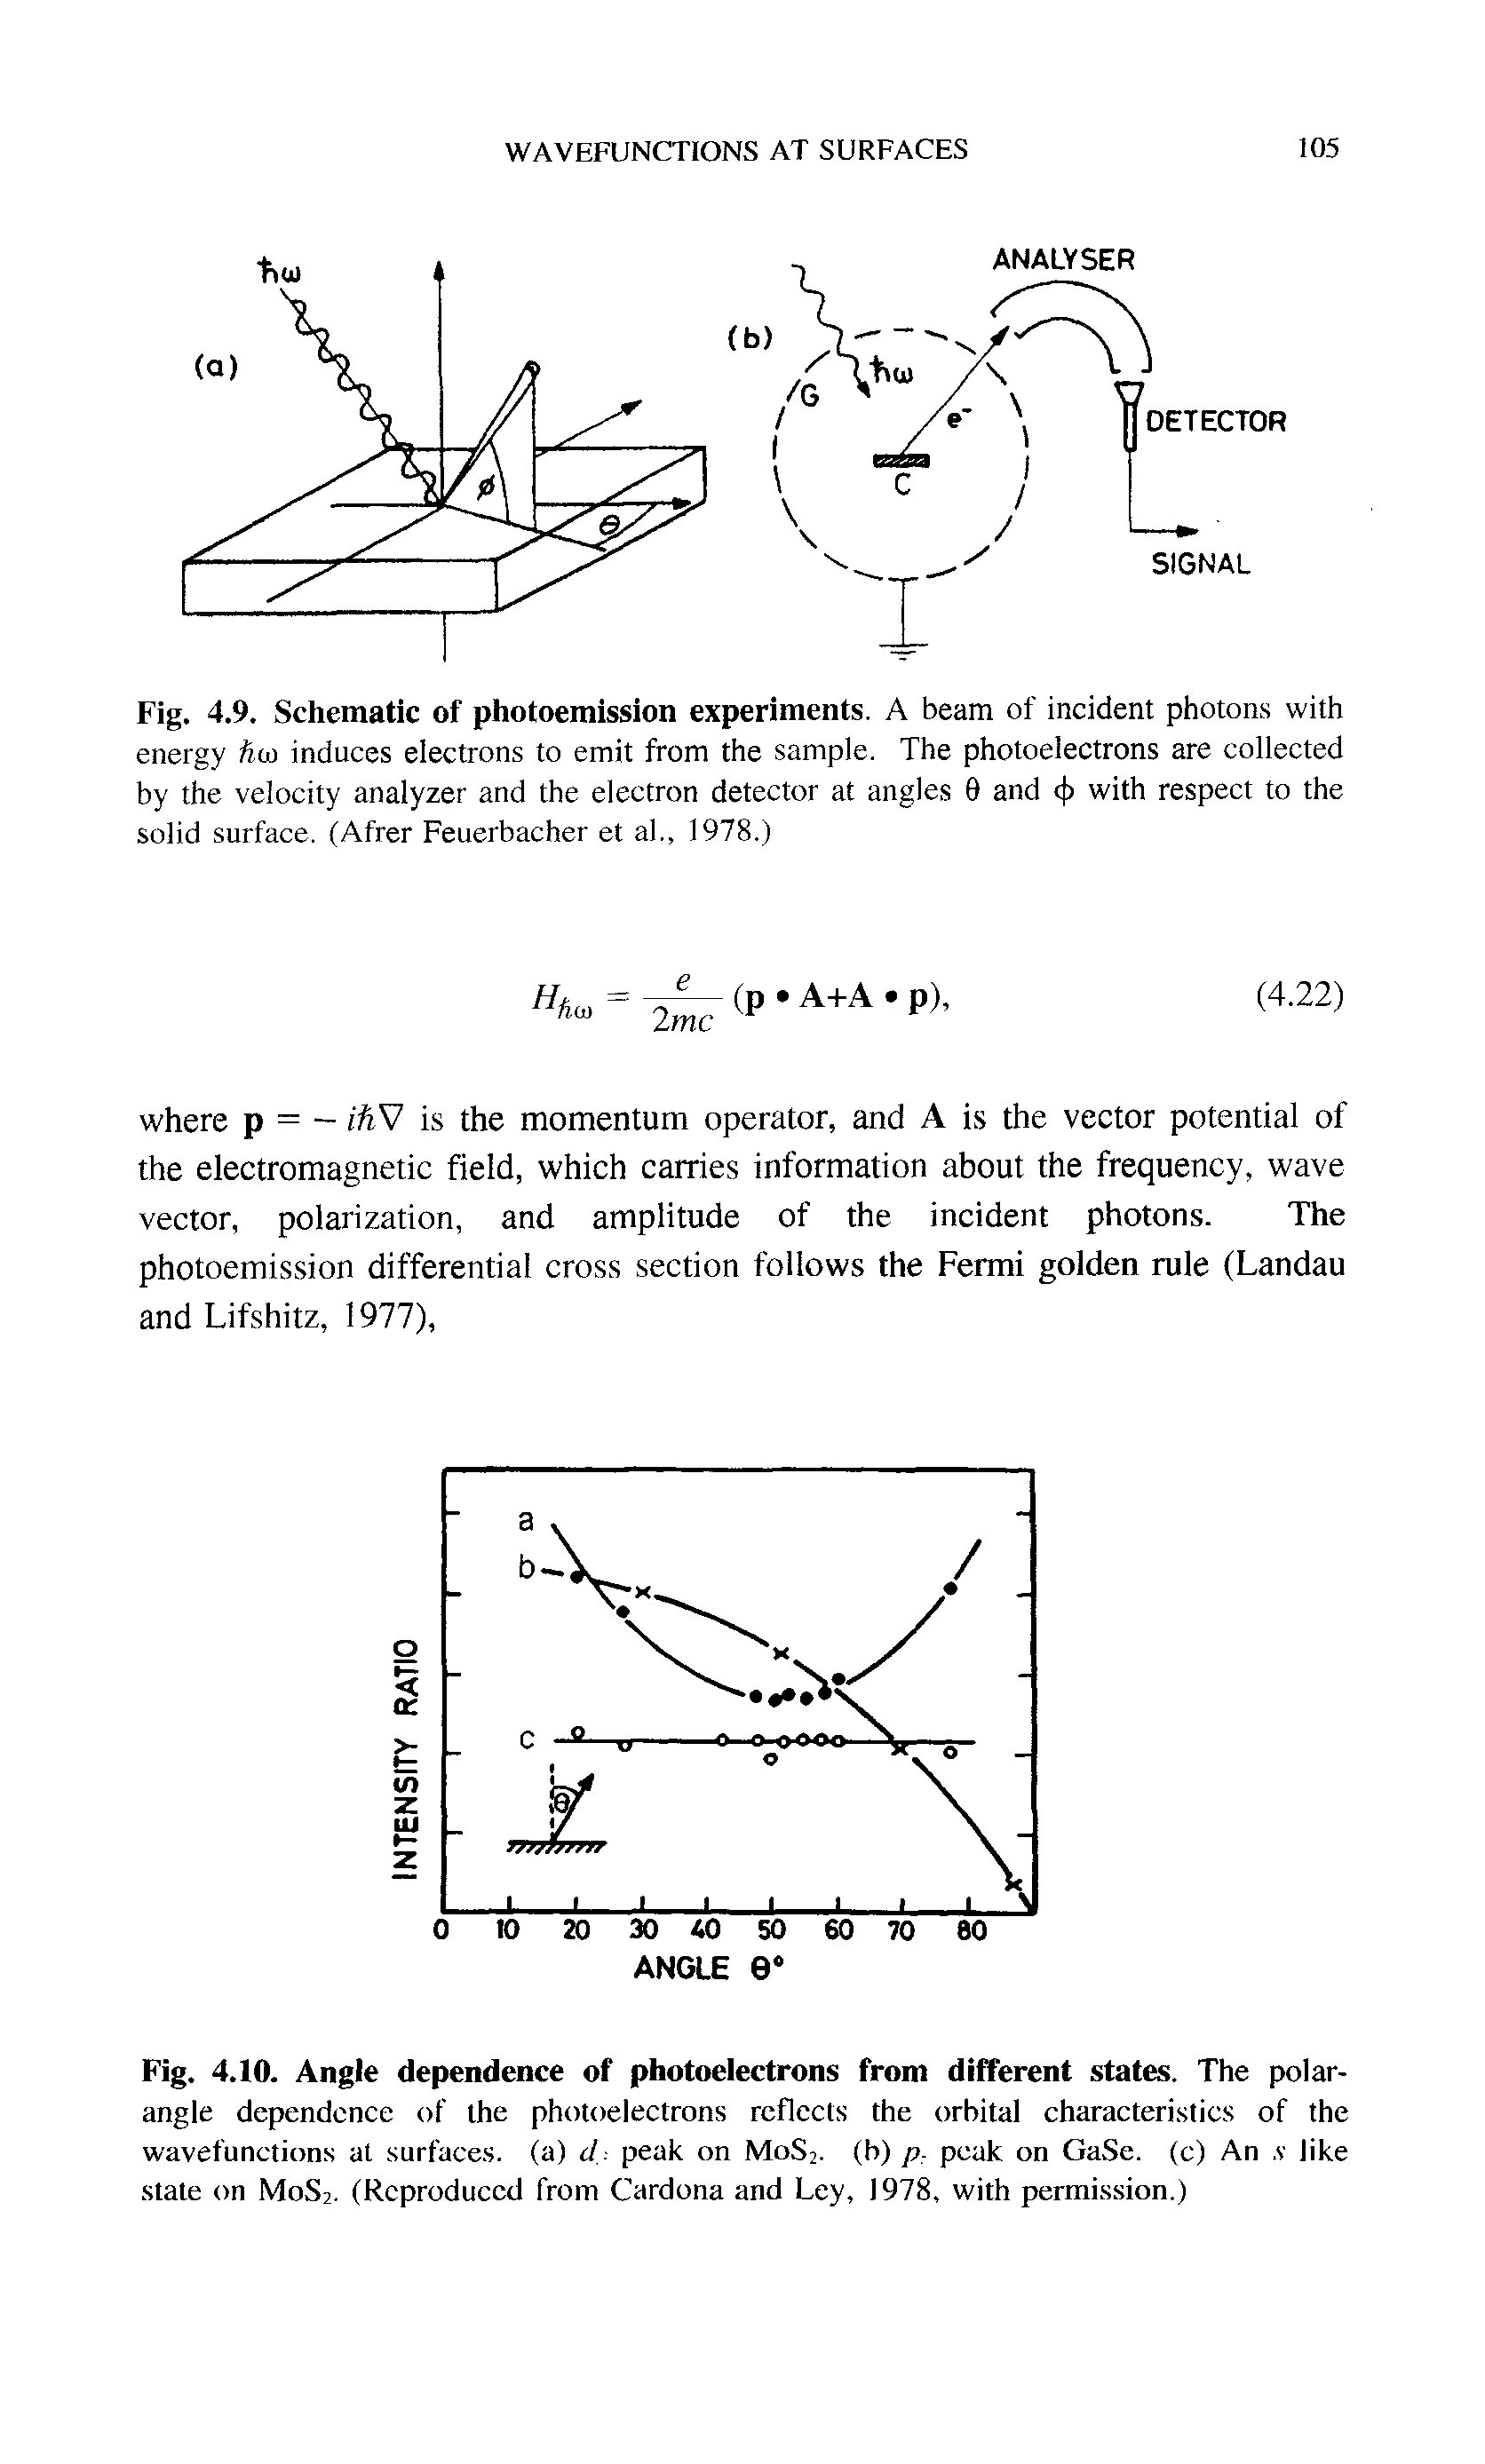 Fig. 4.9. Schematic of photoemission experiments, A beam of incident photons with energy ftto induces electrons to emit from the sample. The photoelectrons are collected by the velocity analyzer and the electron detector at angles 9 and <J) with respect to the solid surface. (Afrer Feuerbacher et al, 1978.)...